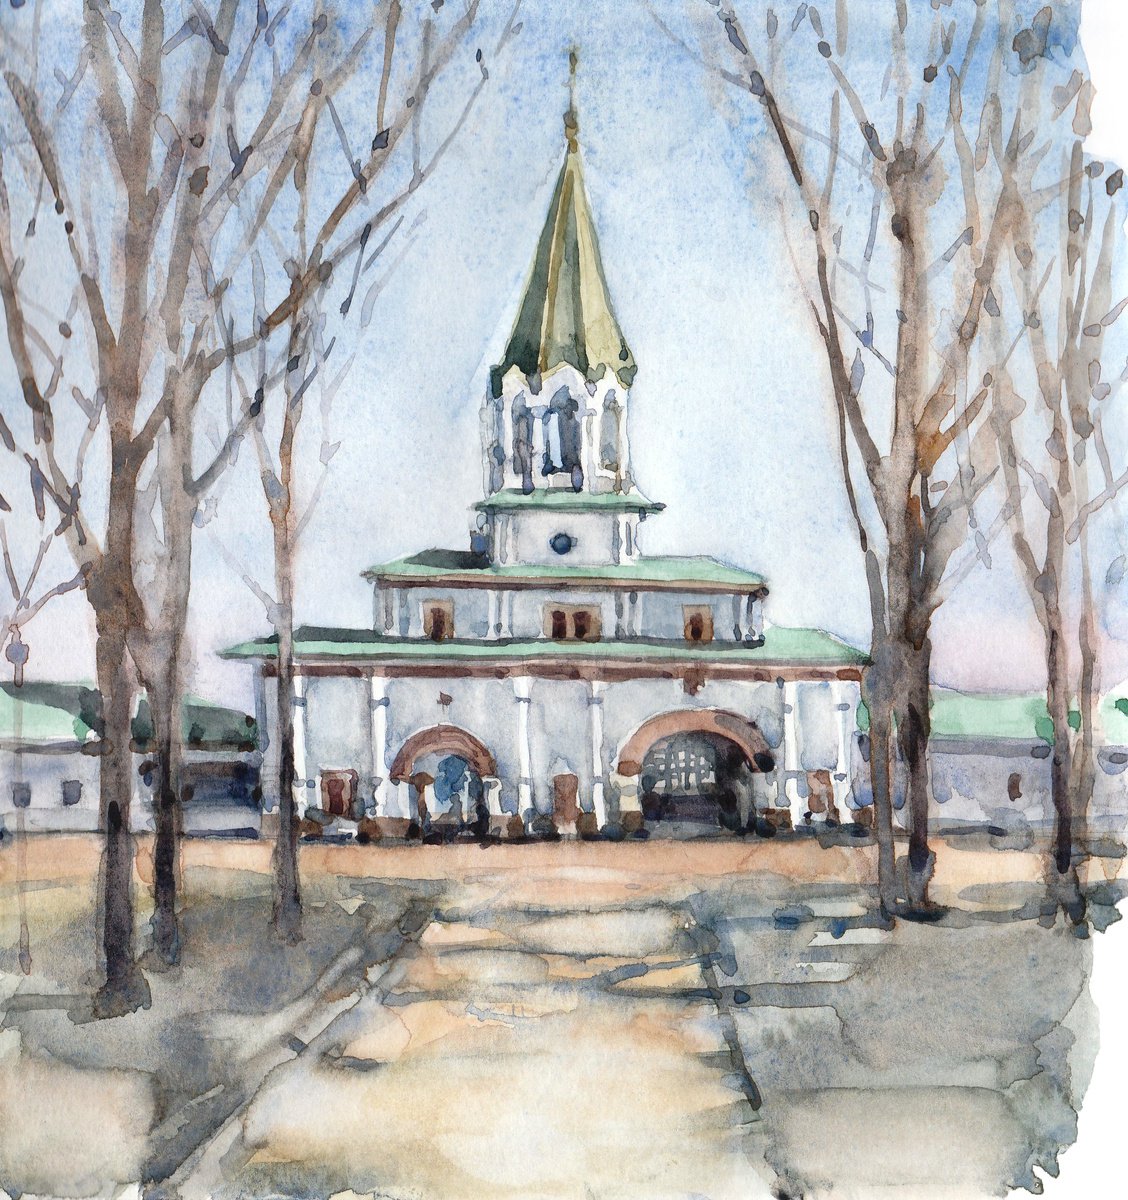 Colonel Palace in Moscow by Tatiana Alekseeva